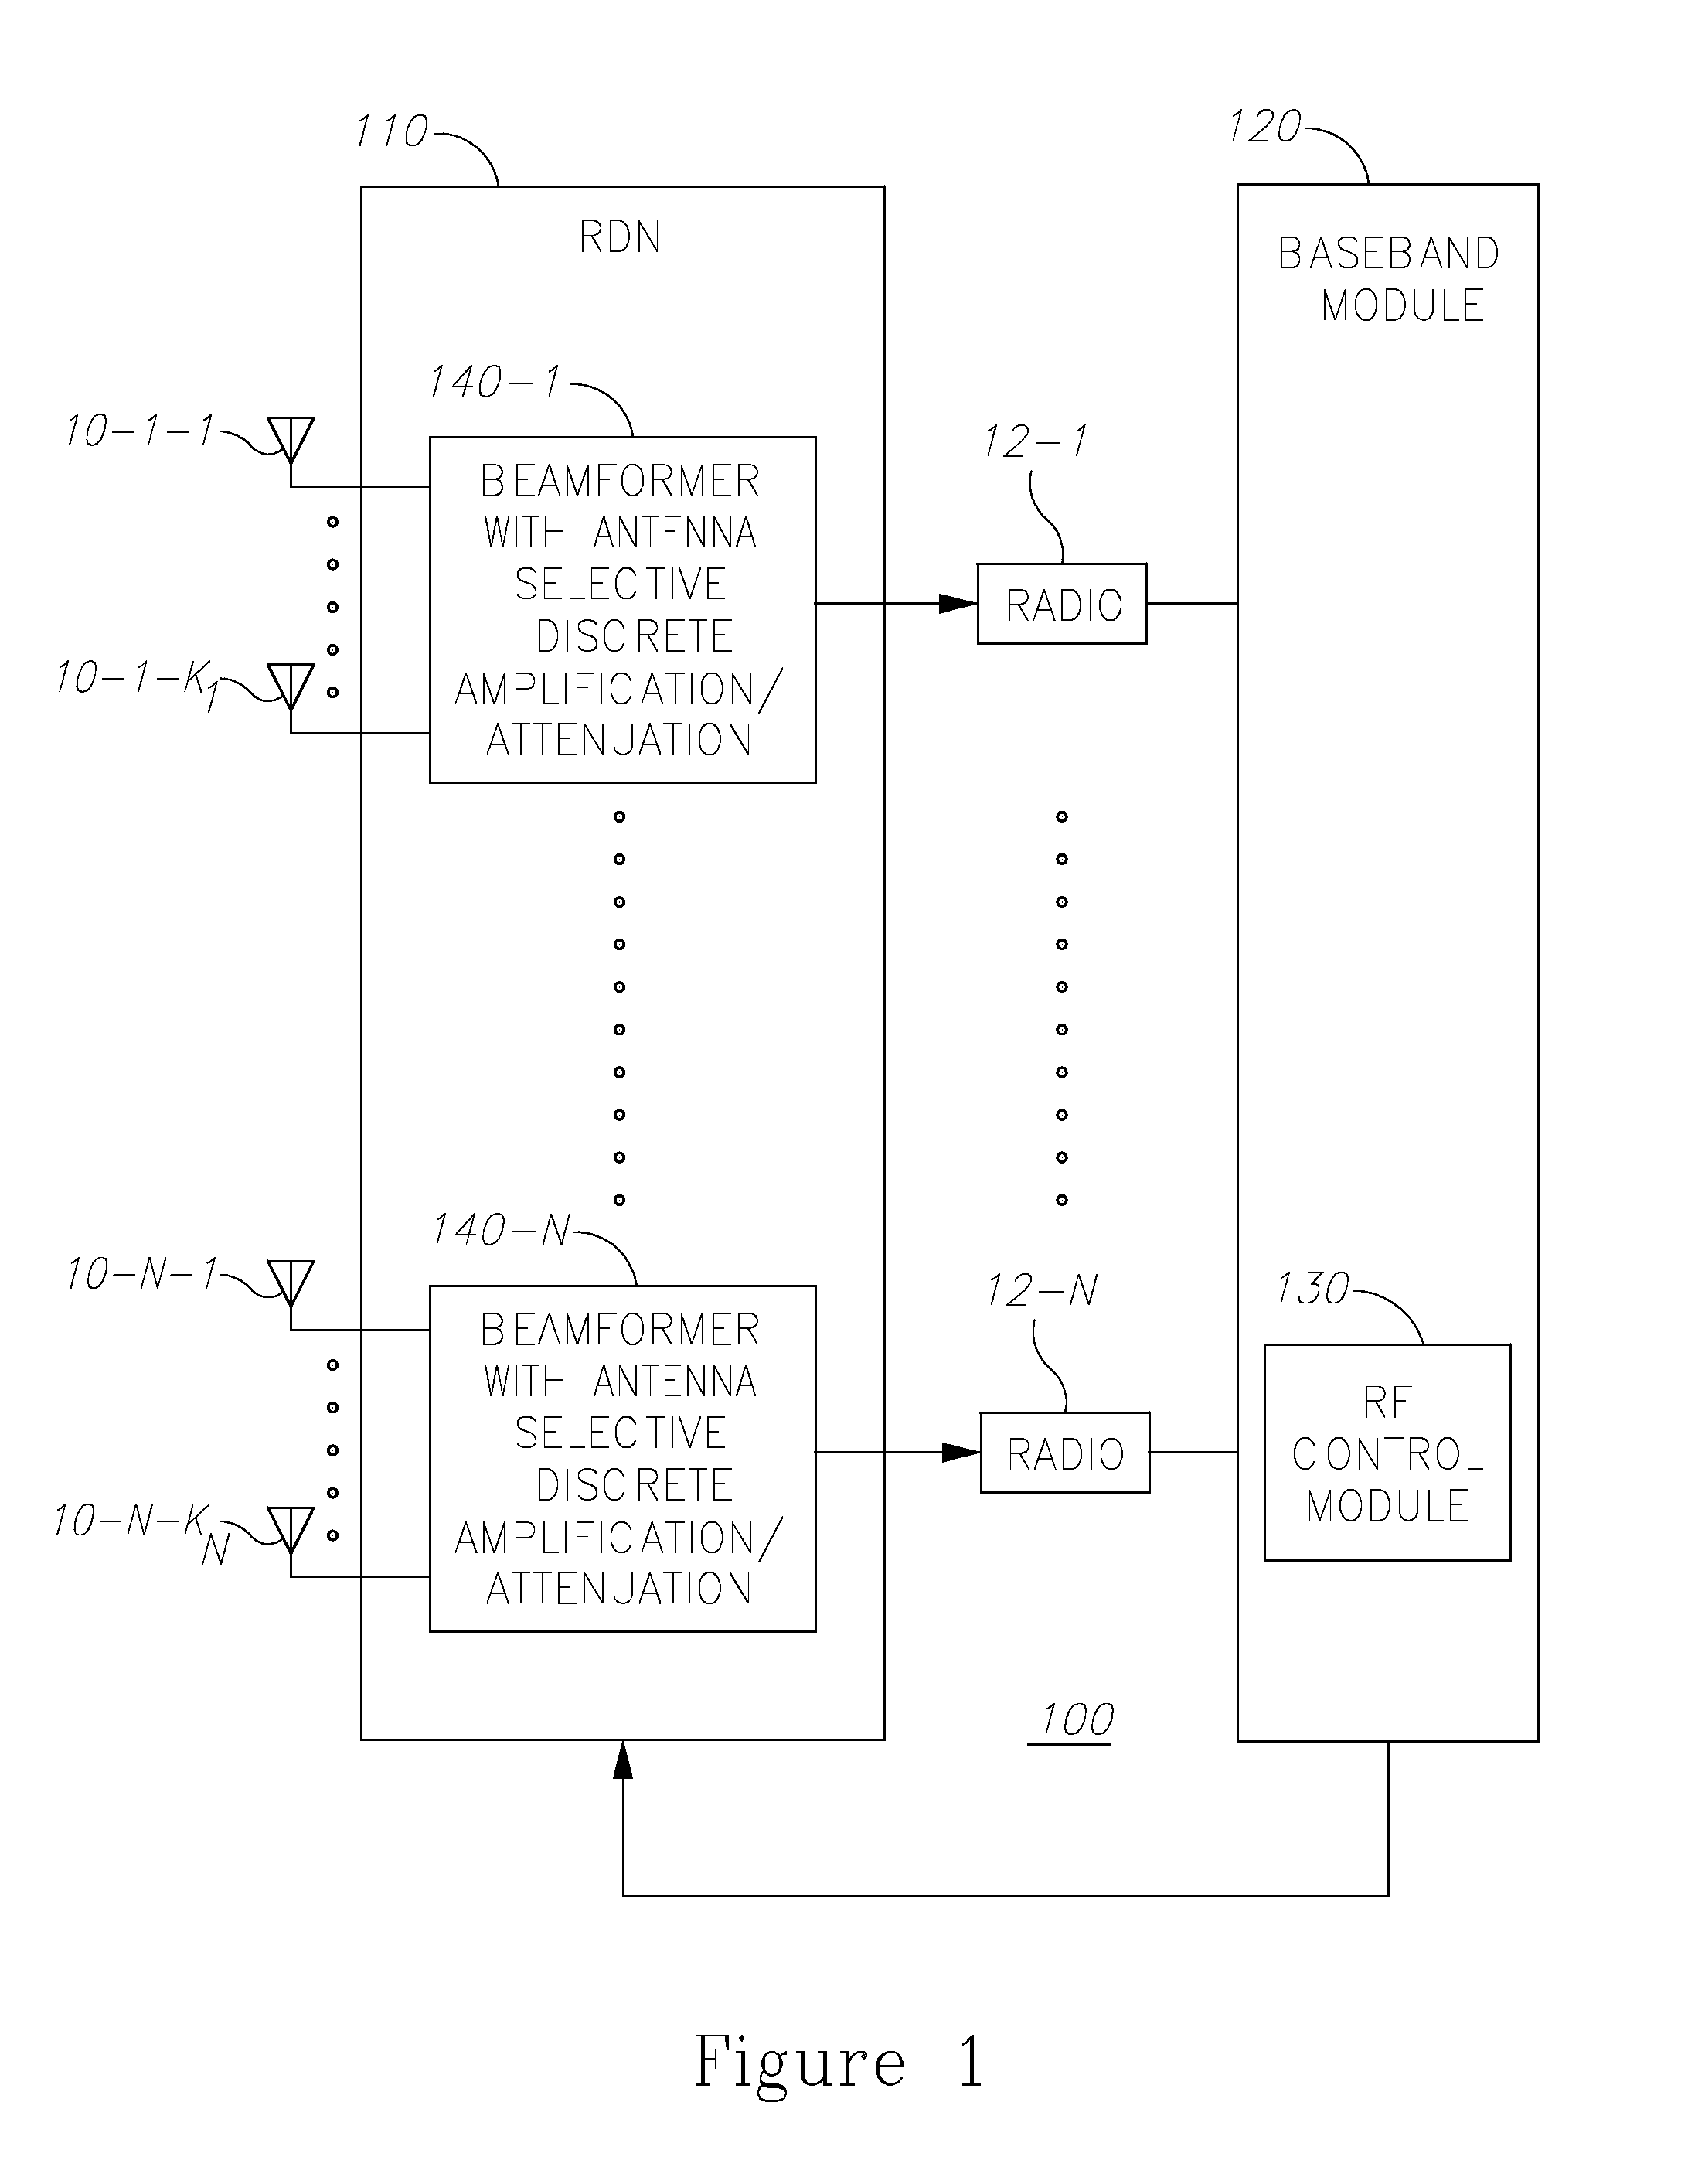 System and method for discrete gain control in hybrid MIMO RF beamforming for multi layer MIMO base station